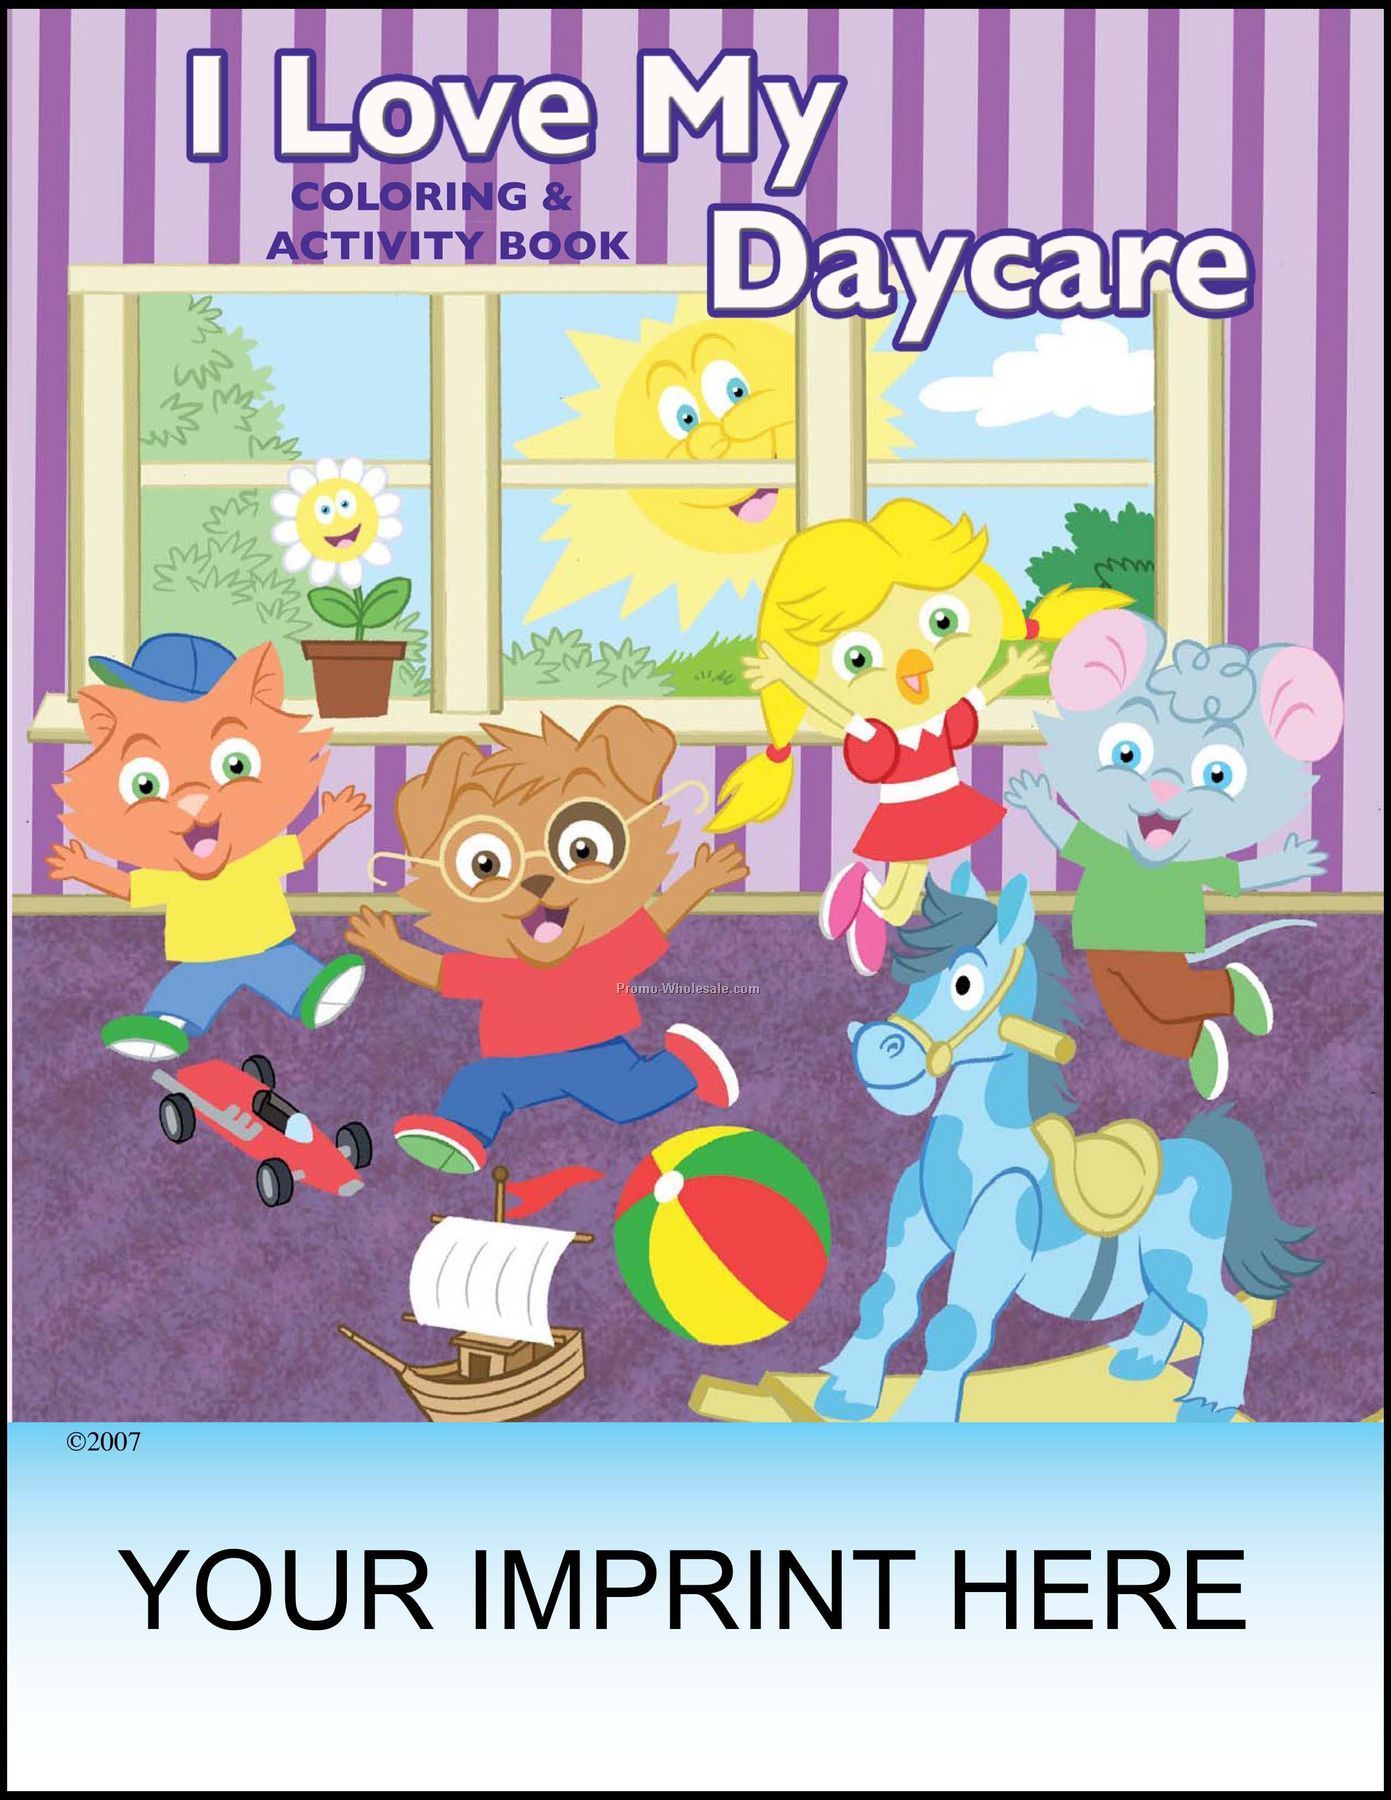 8-3/8"x10-7/8" I Love My Daycare Coloring & Activity Book